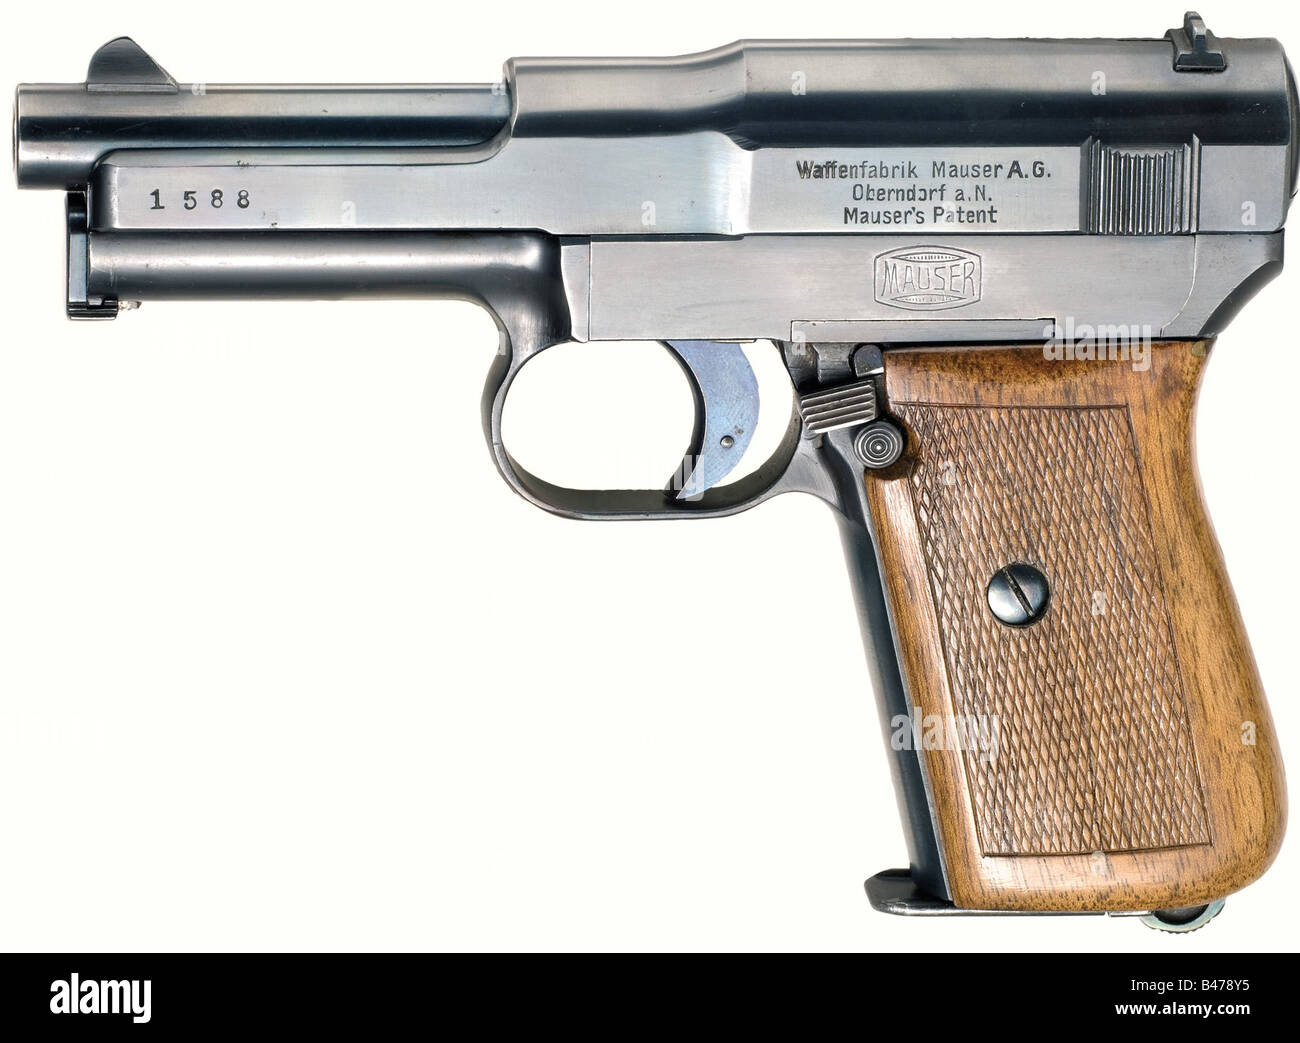 Mauser 7 65 High Resolution Stock Photography and Images - Alamy